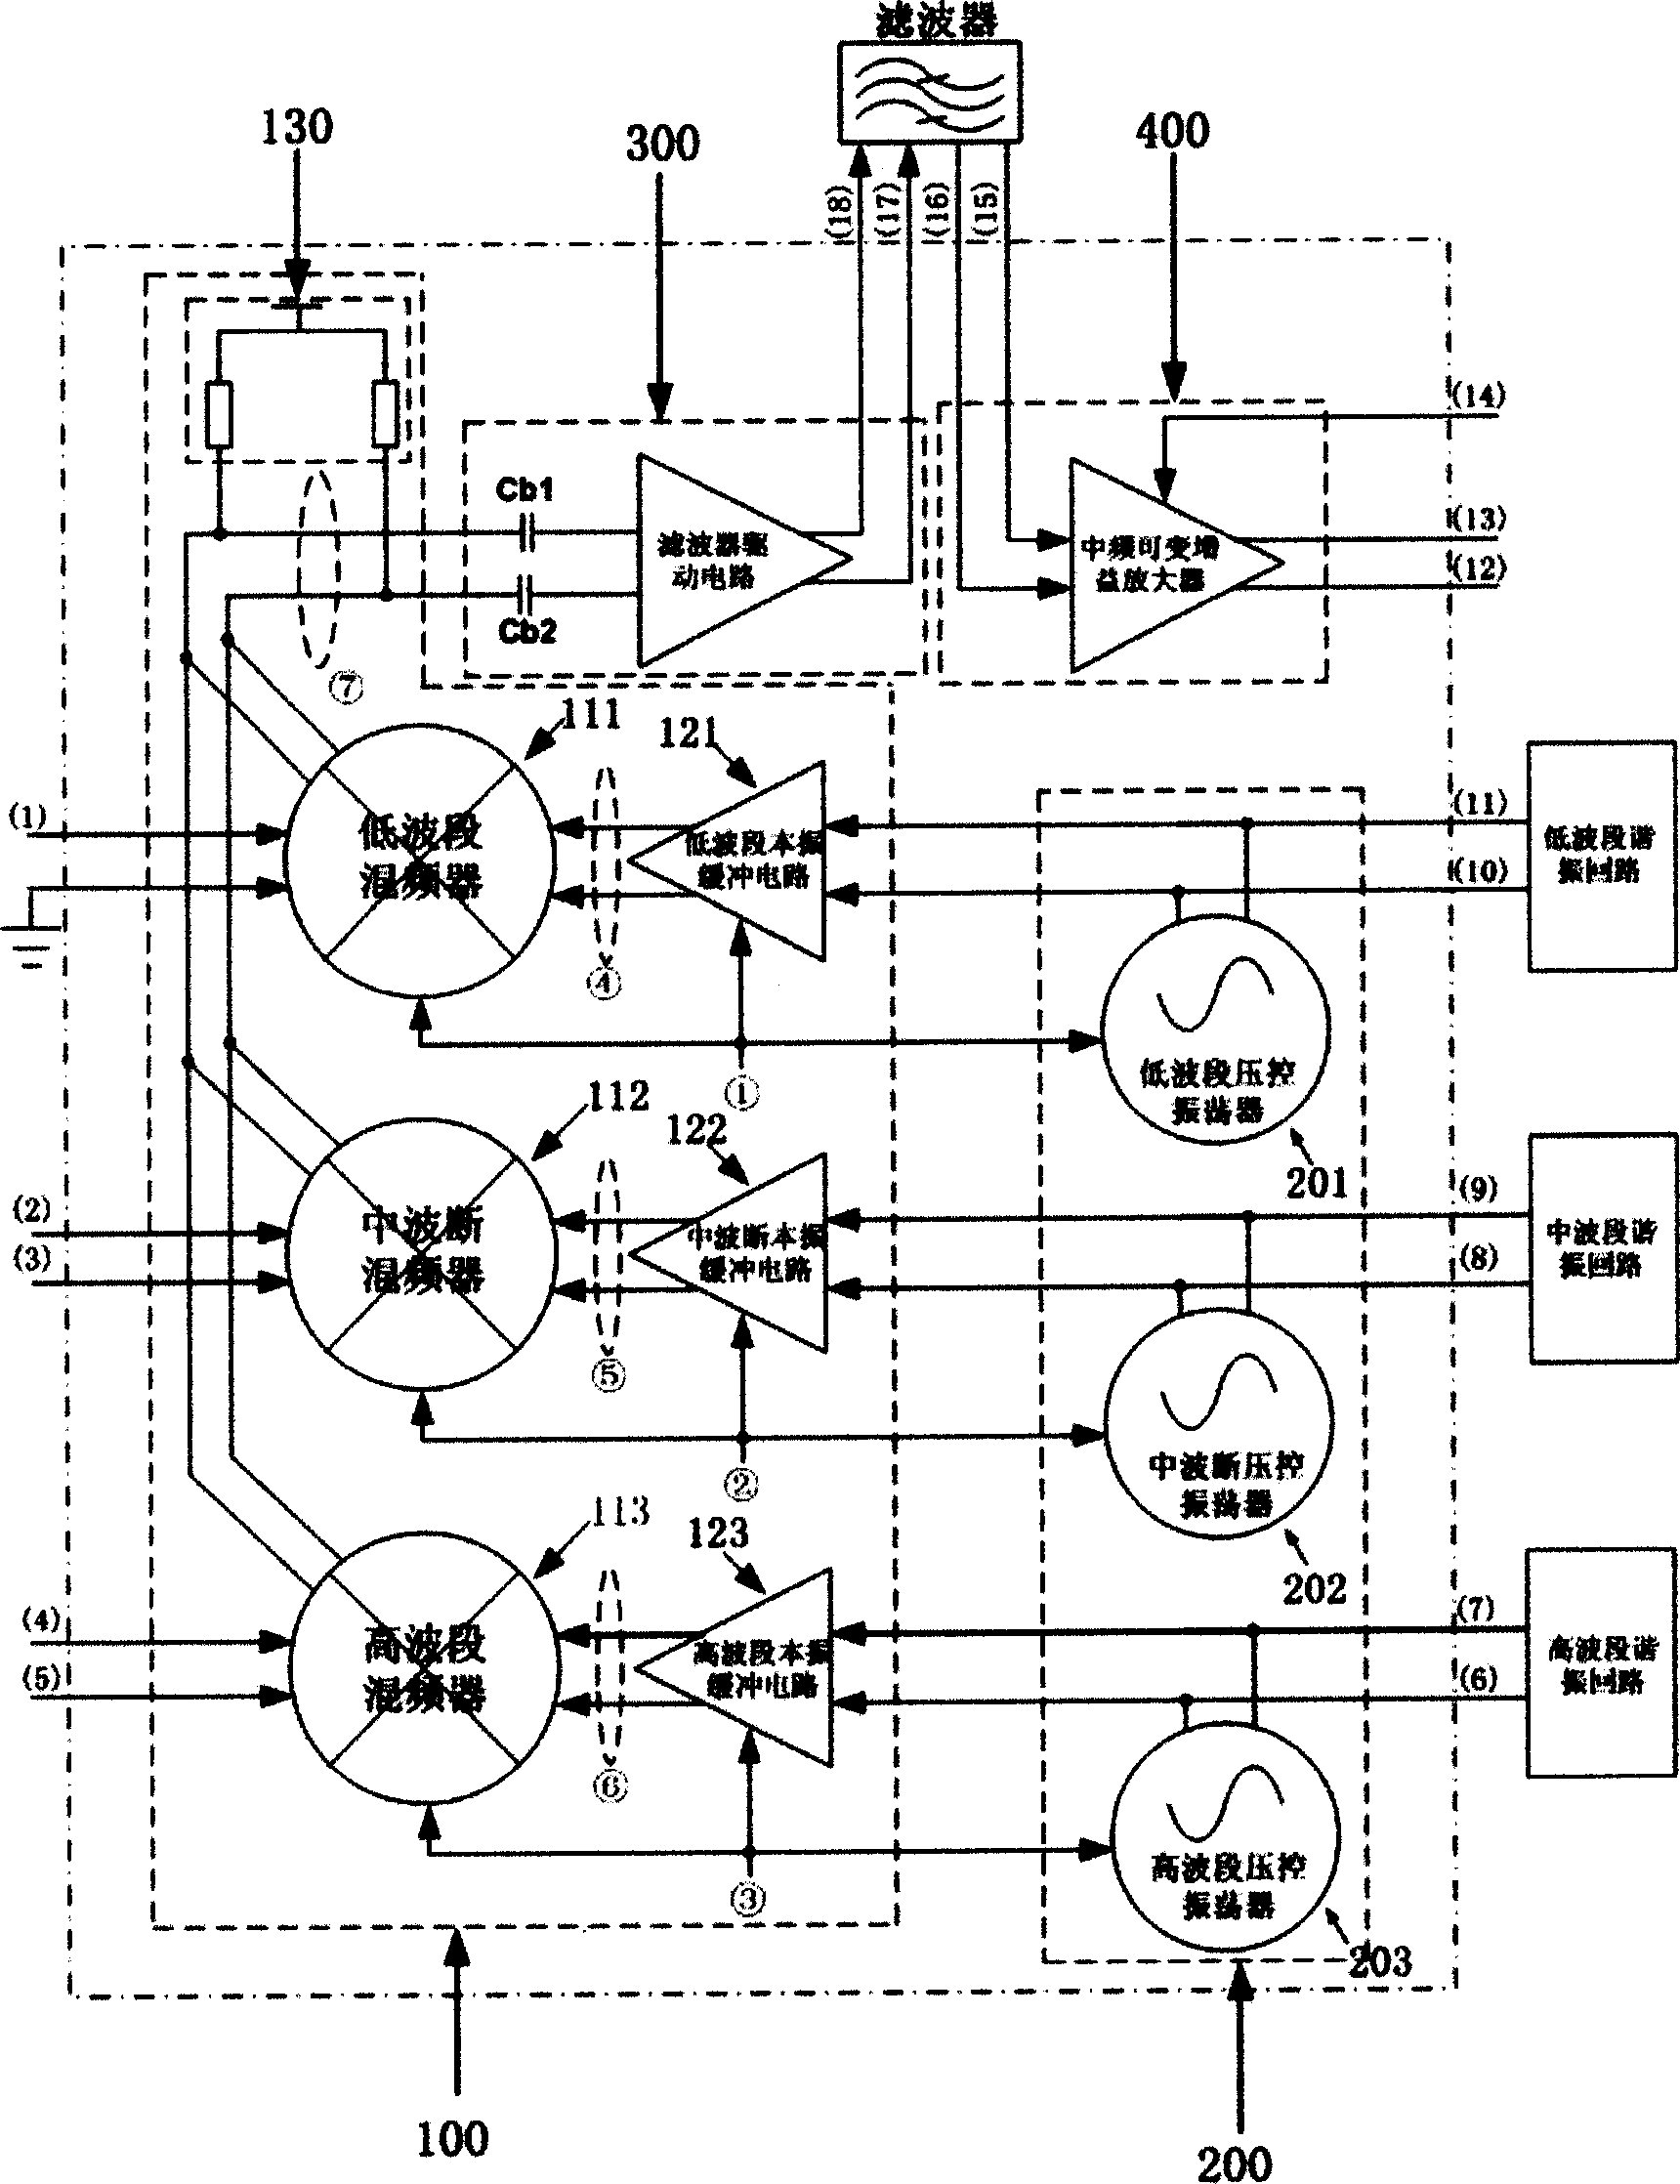 CMOS single variable frequency circuit